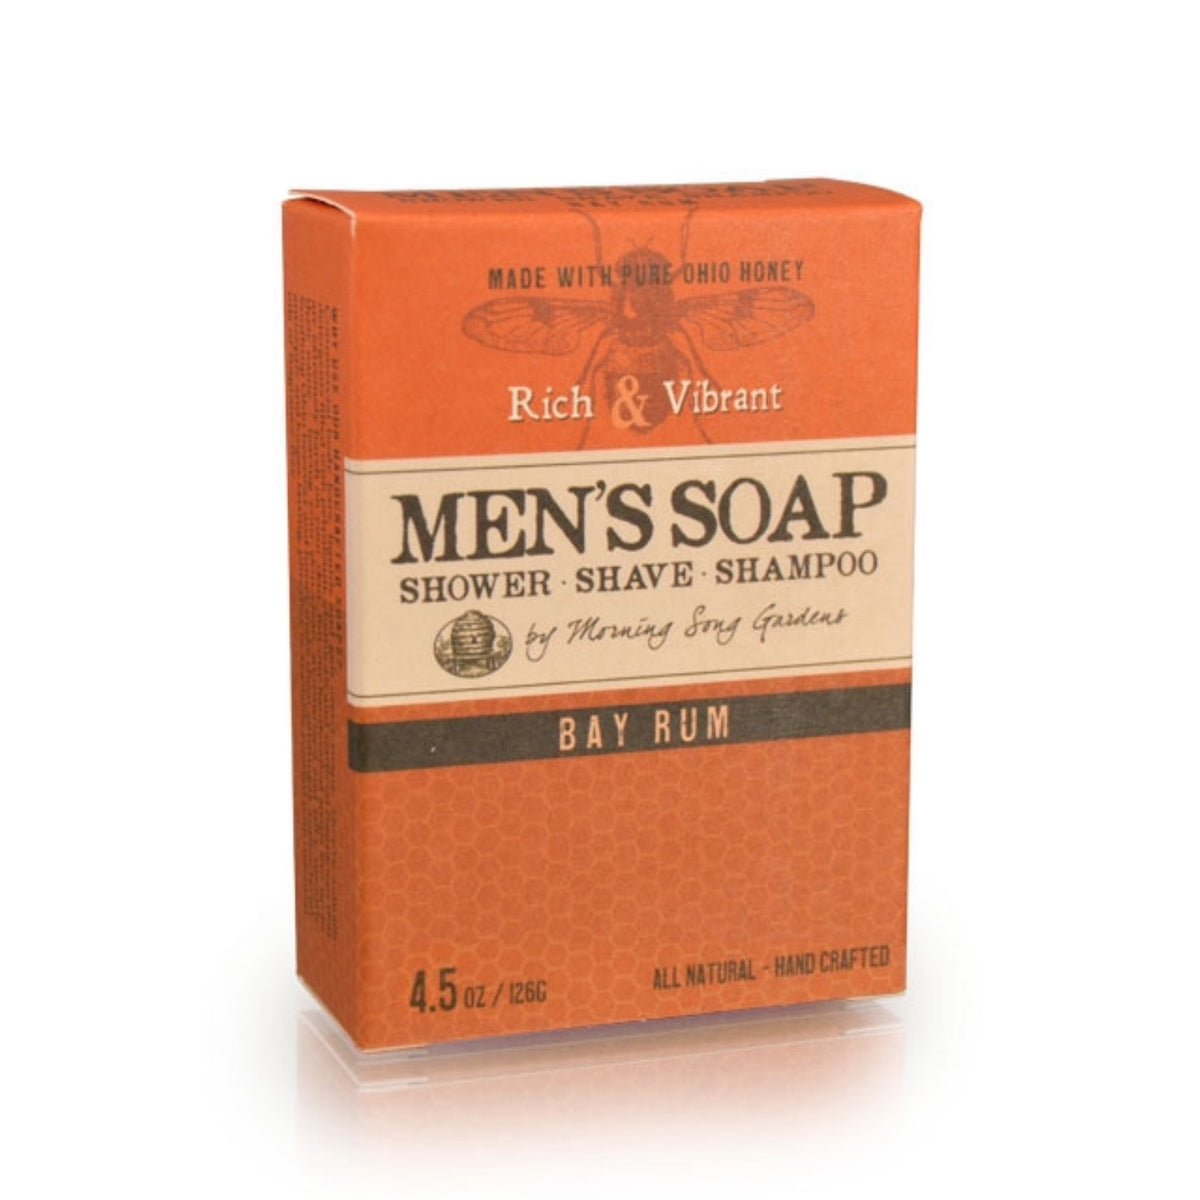 Bay Rum Natural Soap for Men  Read About the Best Bay Rum Shave Soap